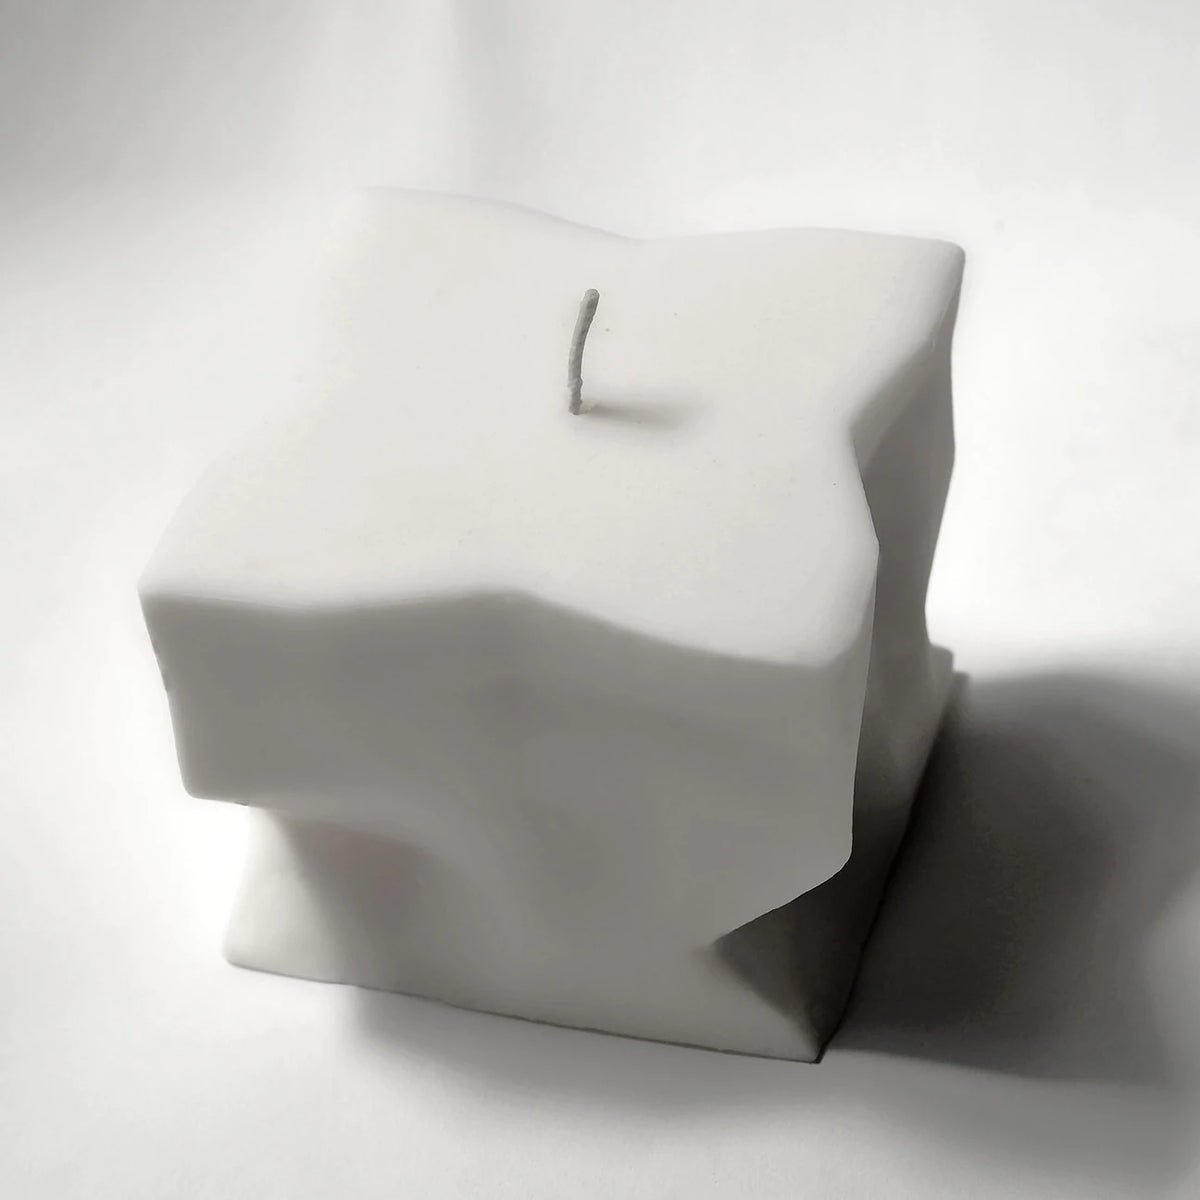 A Baltazar Candle by Andrej Urem is sitting on a white surface.